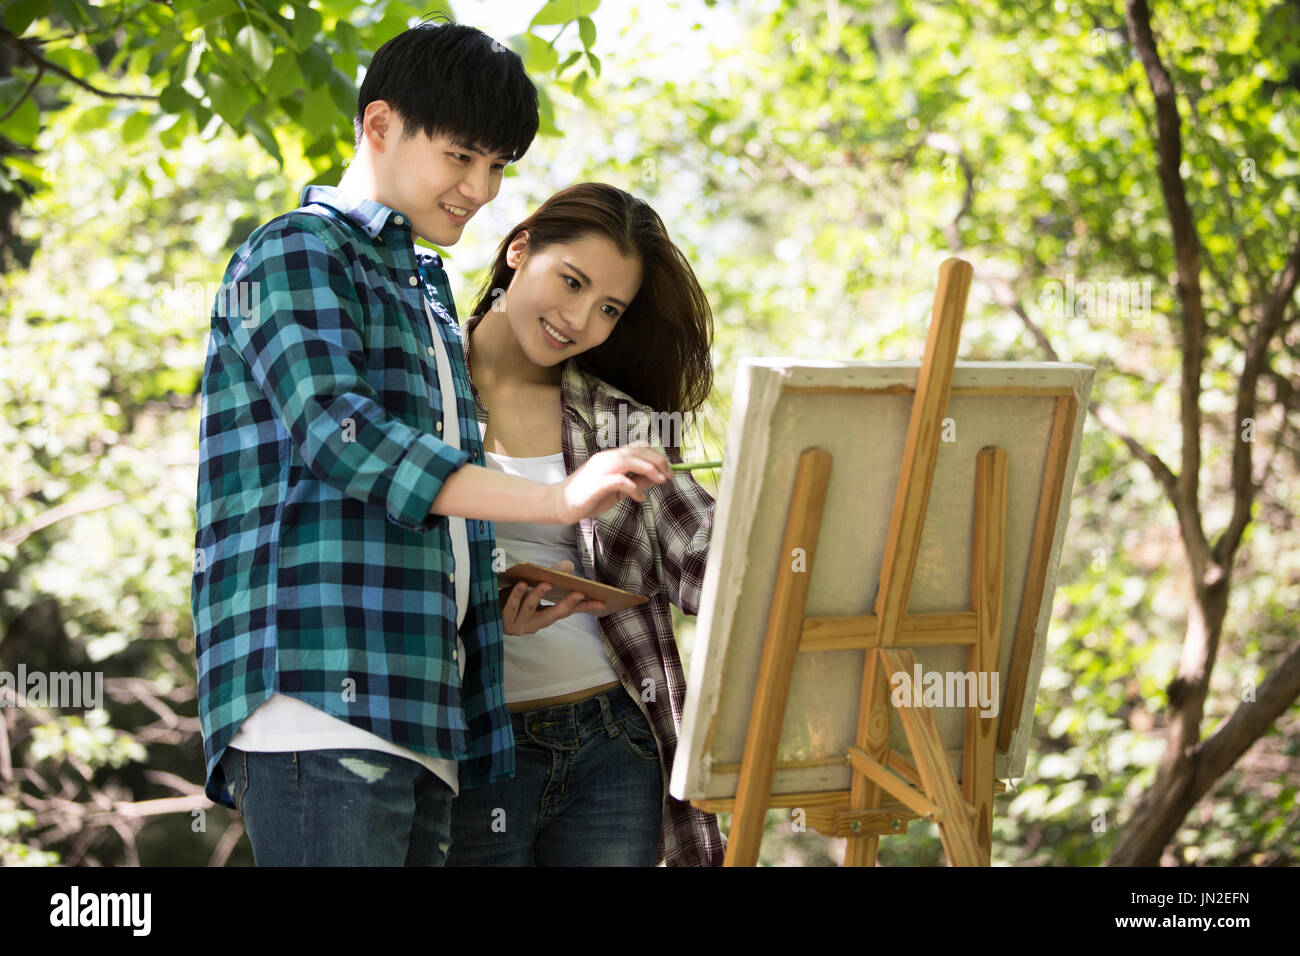 Young couple painting outdoors Stock Photo